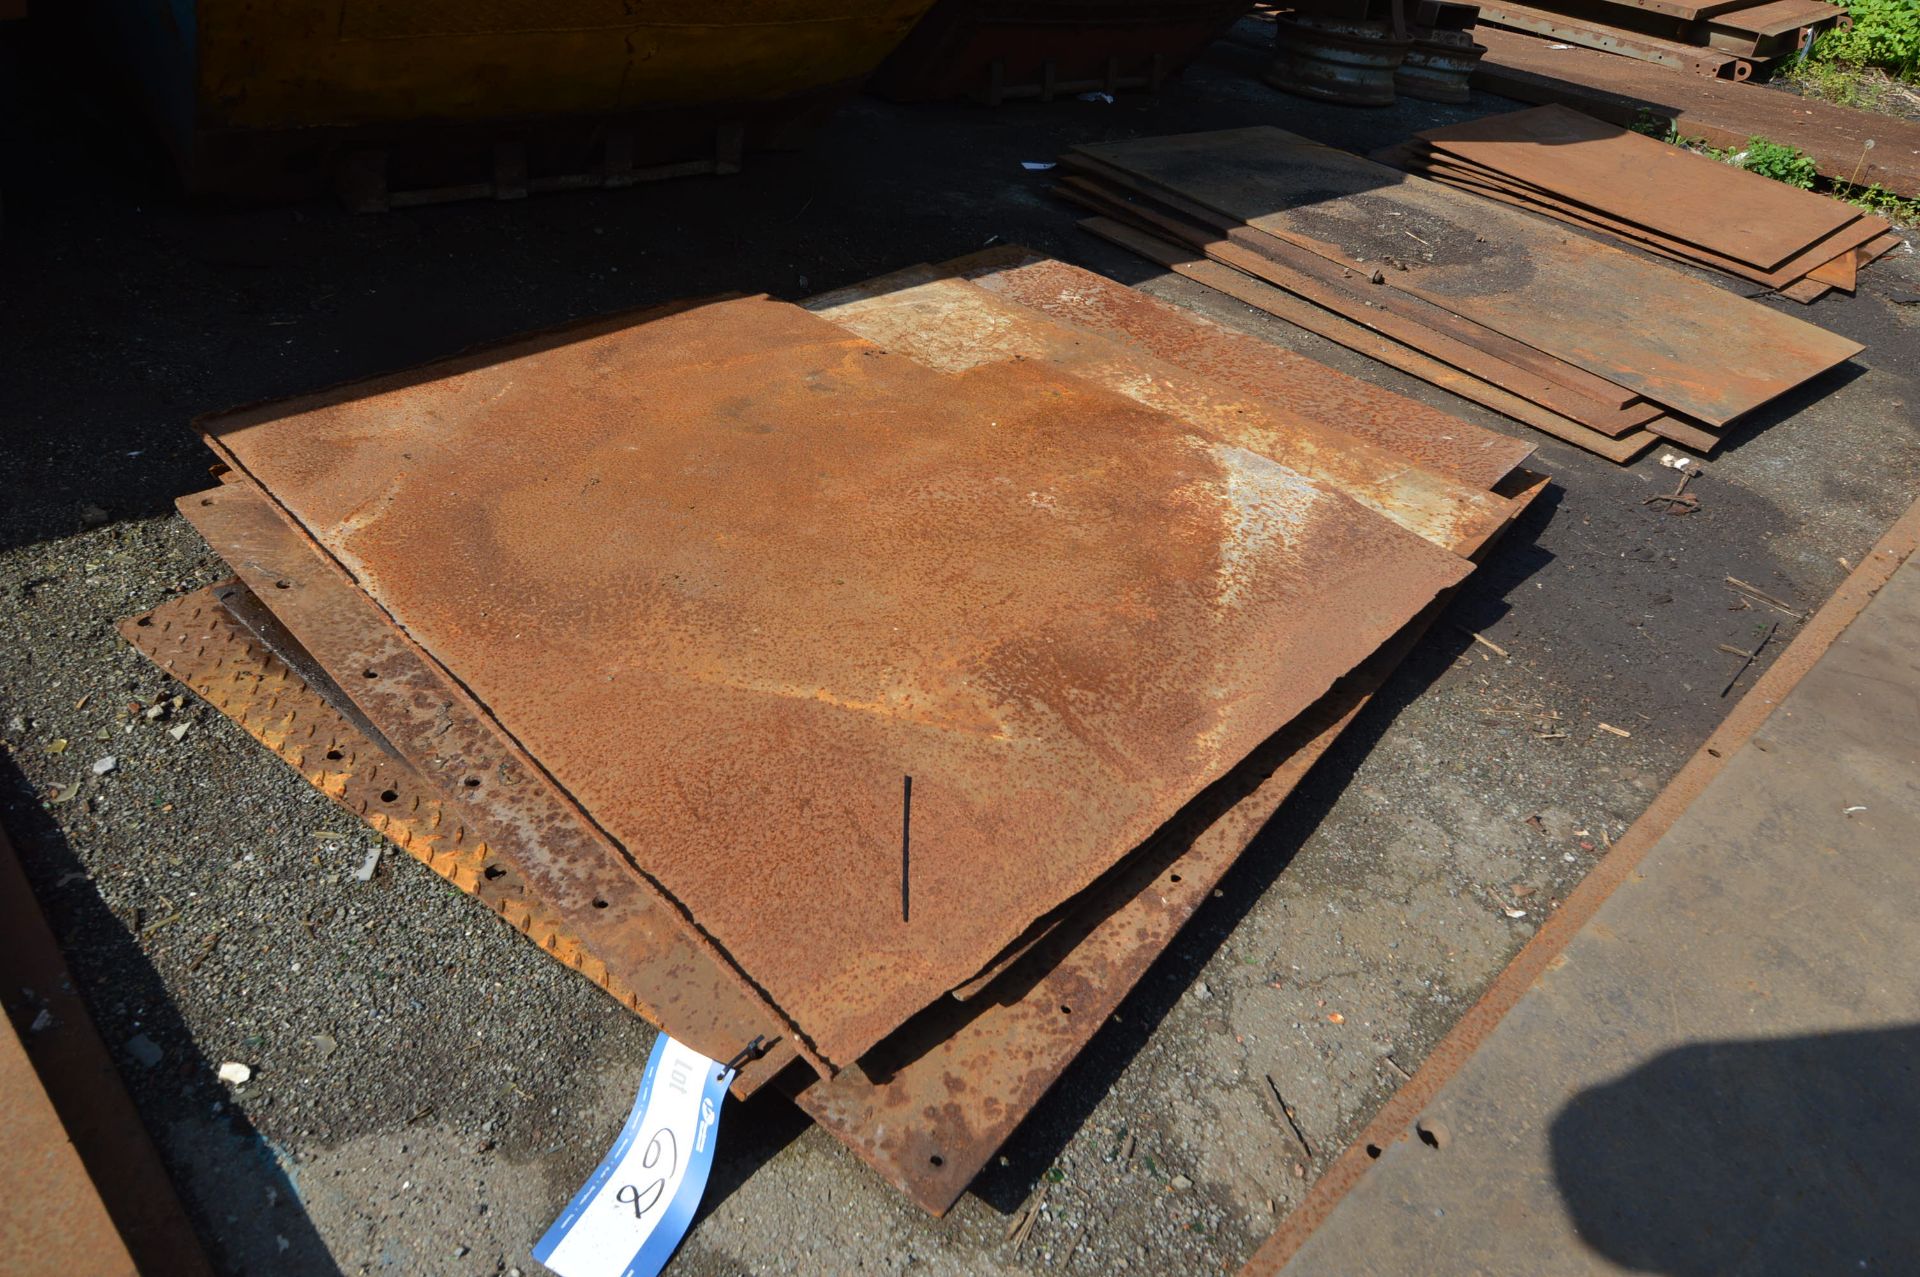 *Approx. 7 Steel Plates, average size approx. 1.7m x 1.3m (please note the final highest bid on this